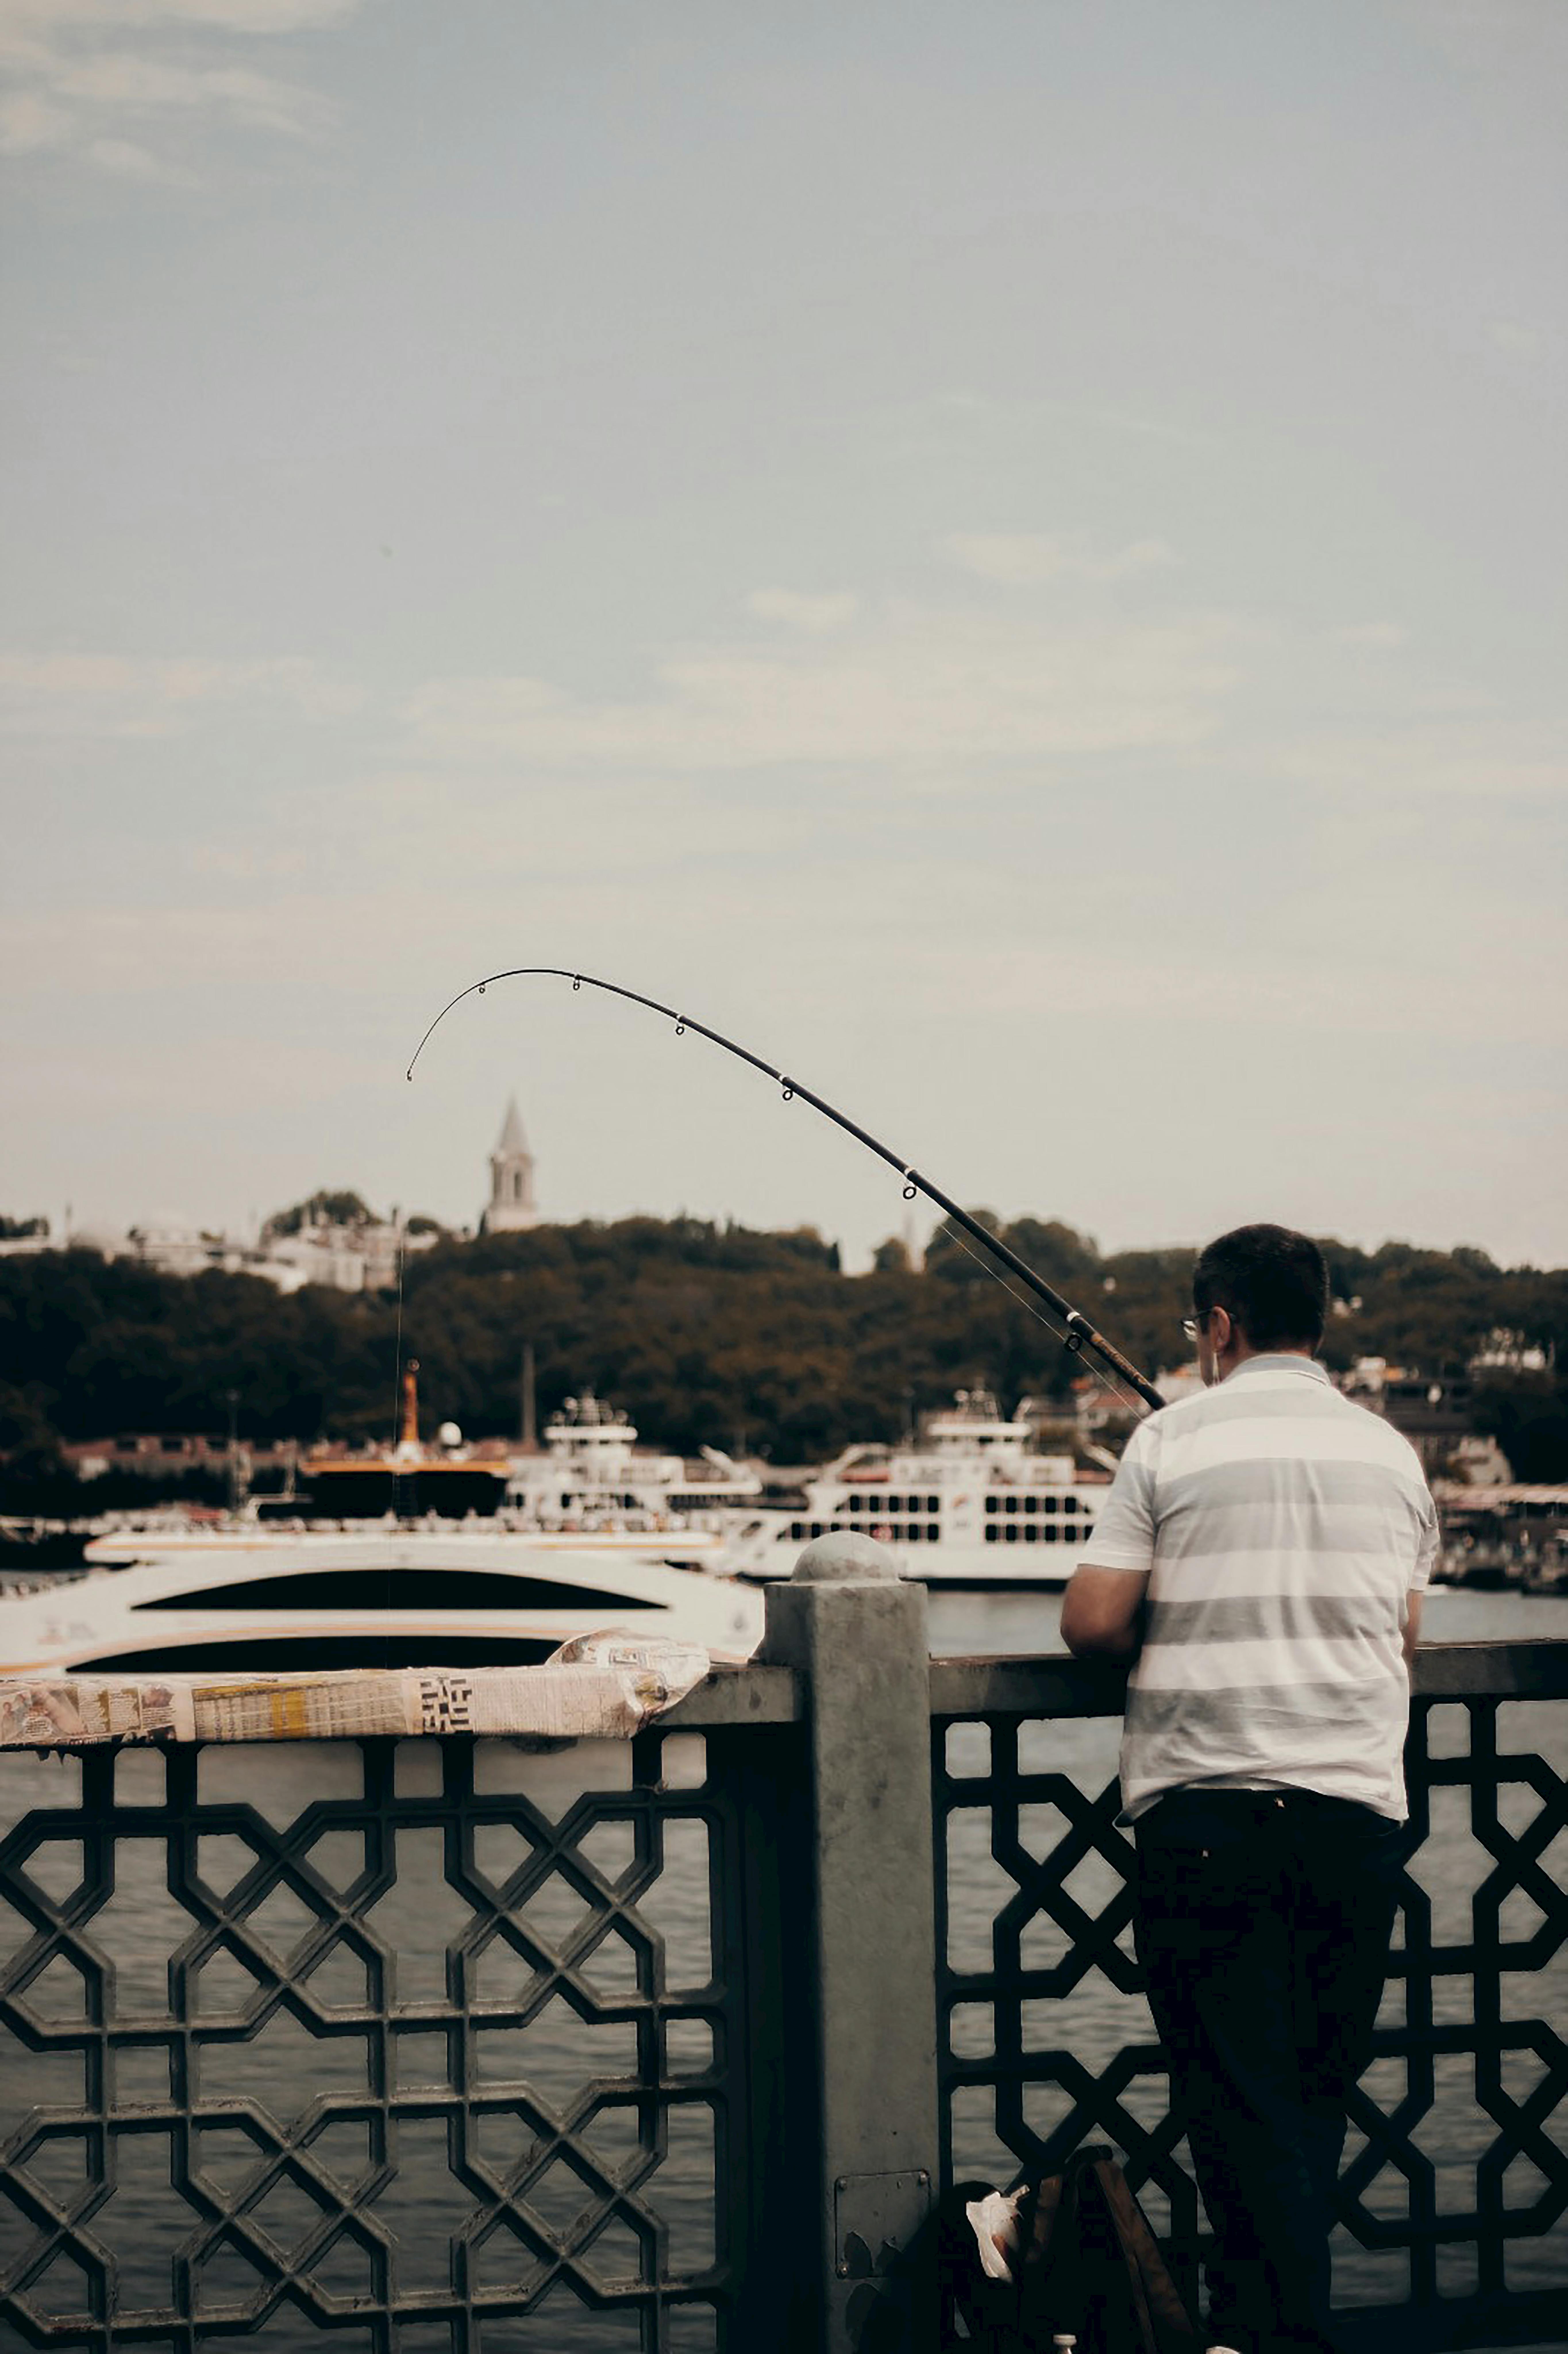 A Woman Sitting on Concrete Dock Fishing with a Couple · Free Stock Photo